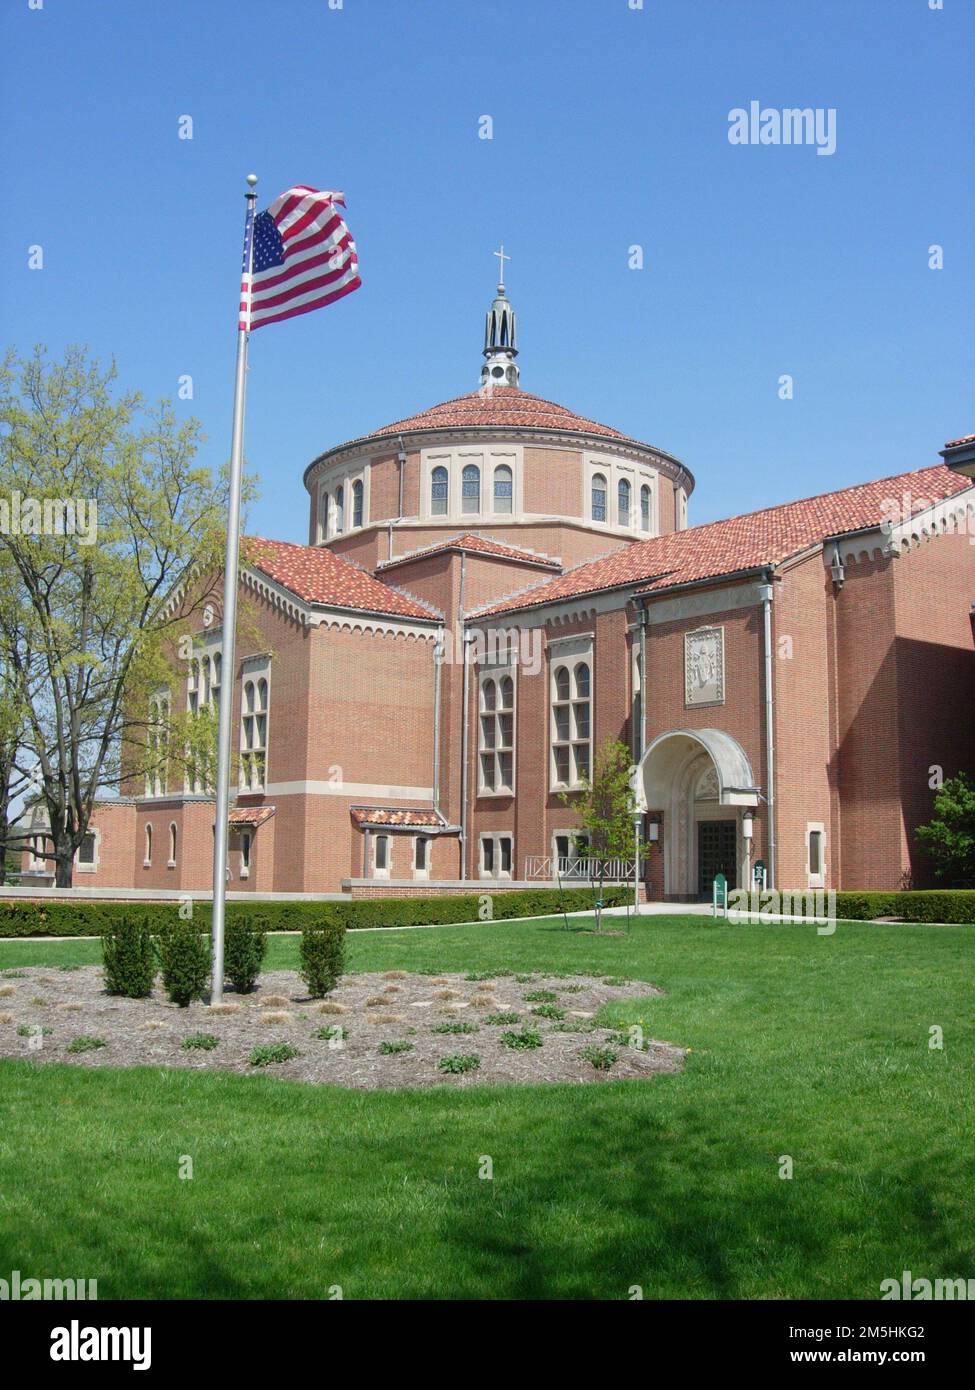 Journey Through Hallowed Ground Byway - A Cloudless Sky Over the Shrine of Saint Elizabeth Ann Seton. The imposing architecture of the Shrine of Saint Elizabeth Ann Seton is impressive red brick and includes a basilica, offices, and several wings surrounded by wide green lawns and a high-flying US flag. Stock Photo